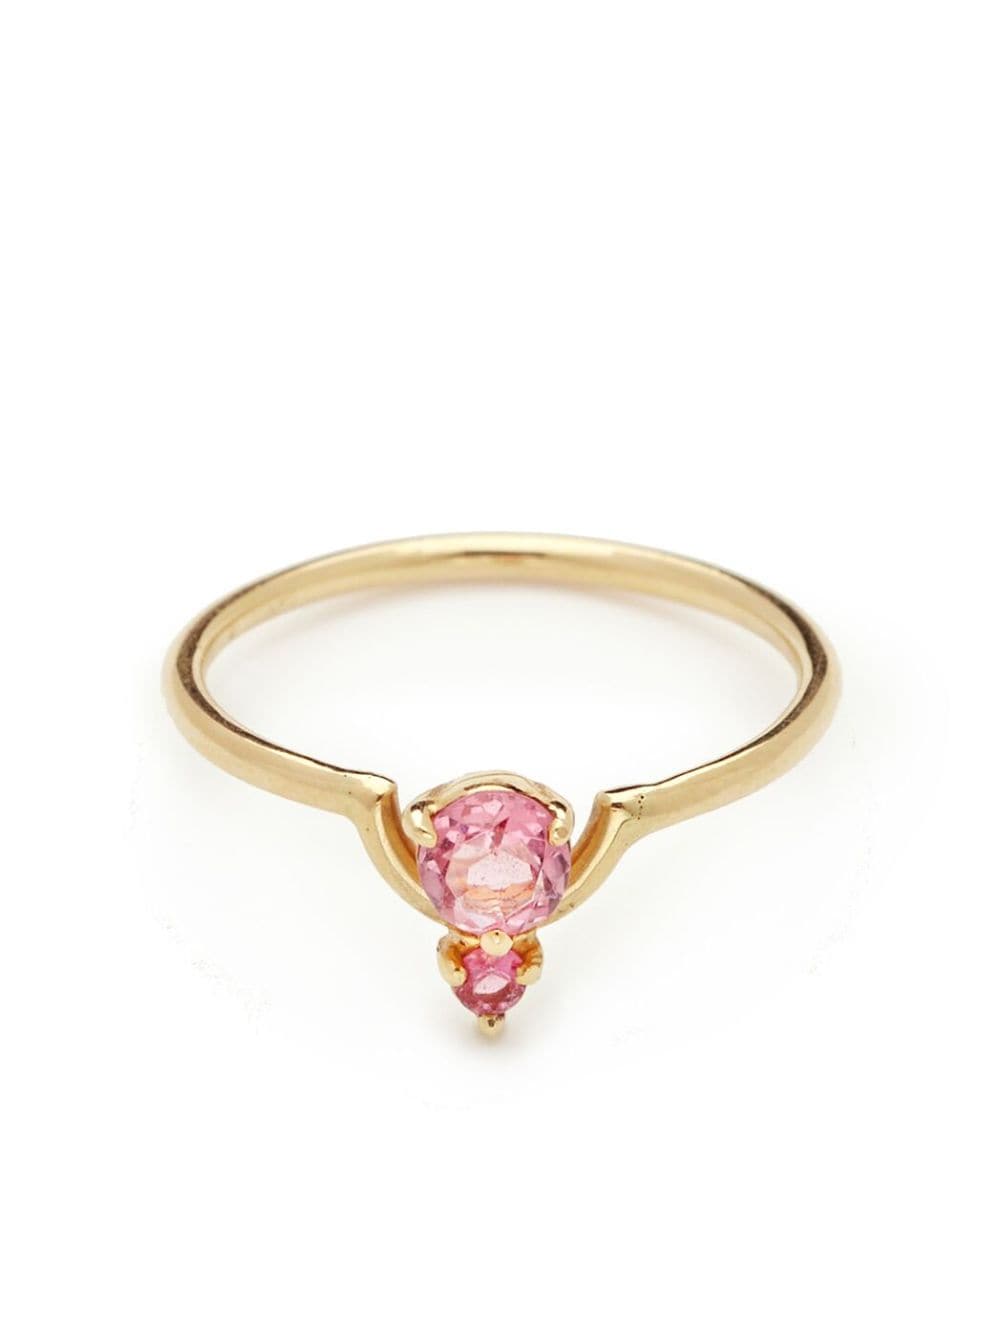 14kt yellow gold Nestled pink sapphire and tourmaline ring